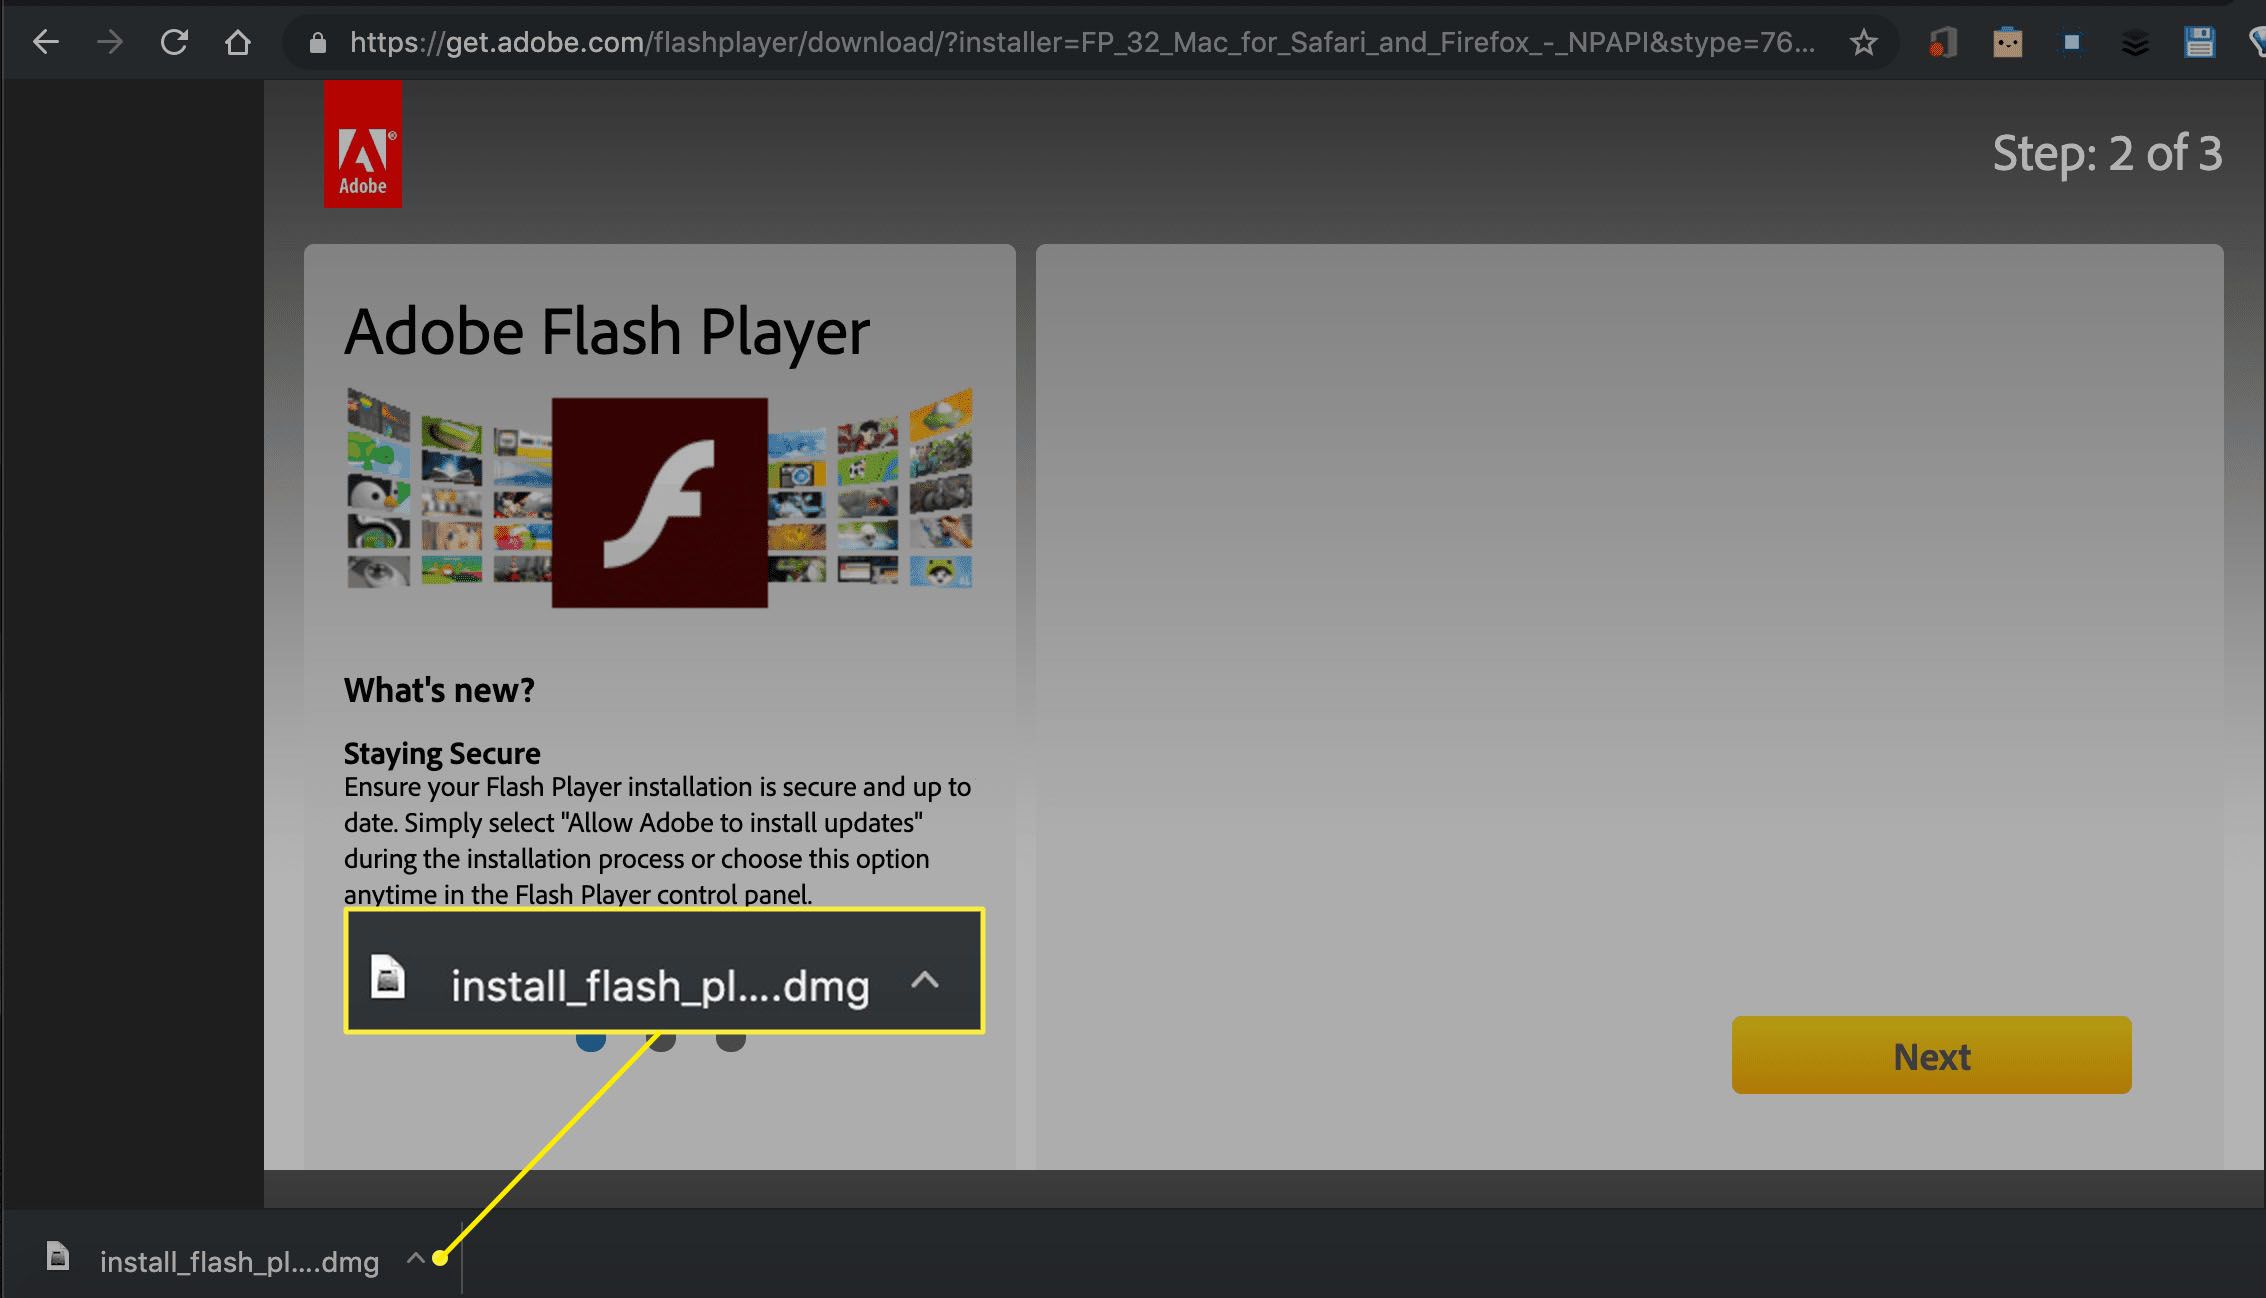 flash player for mac 10.7